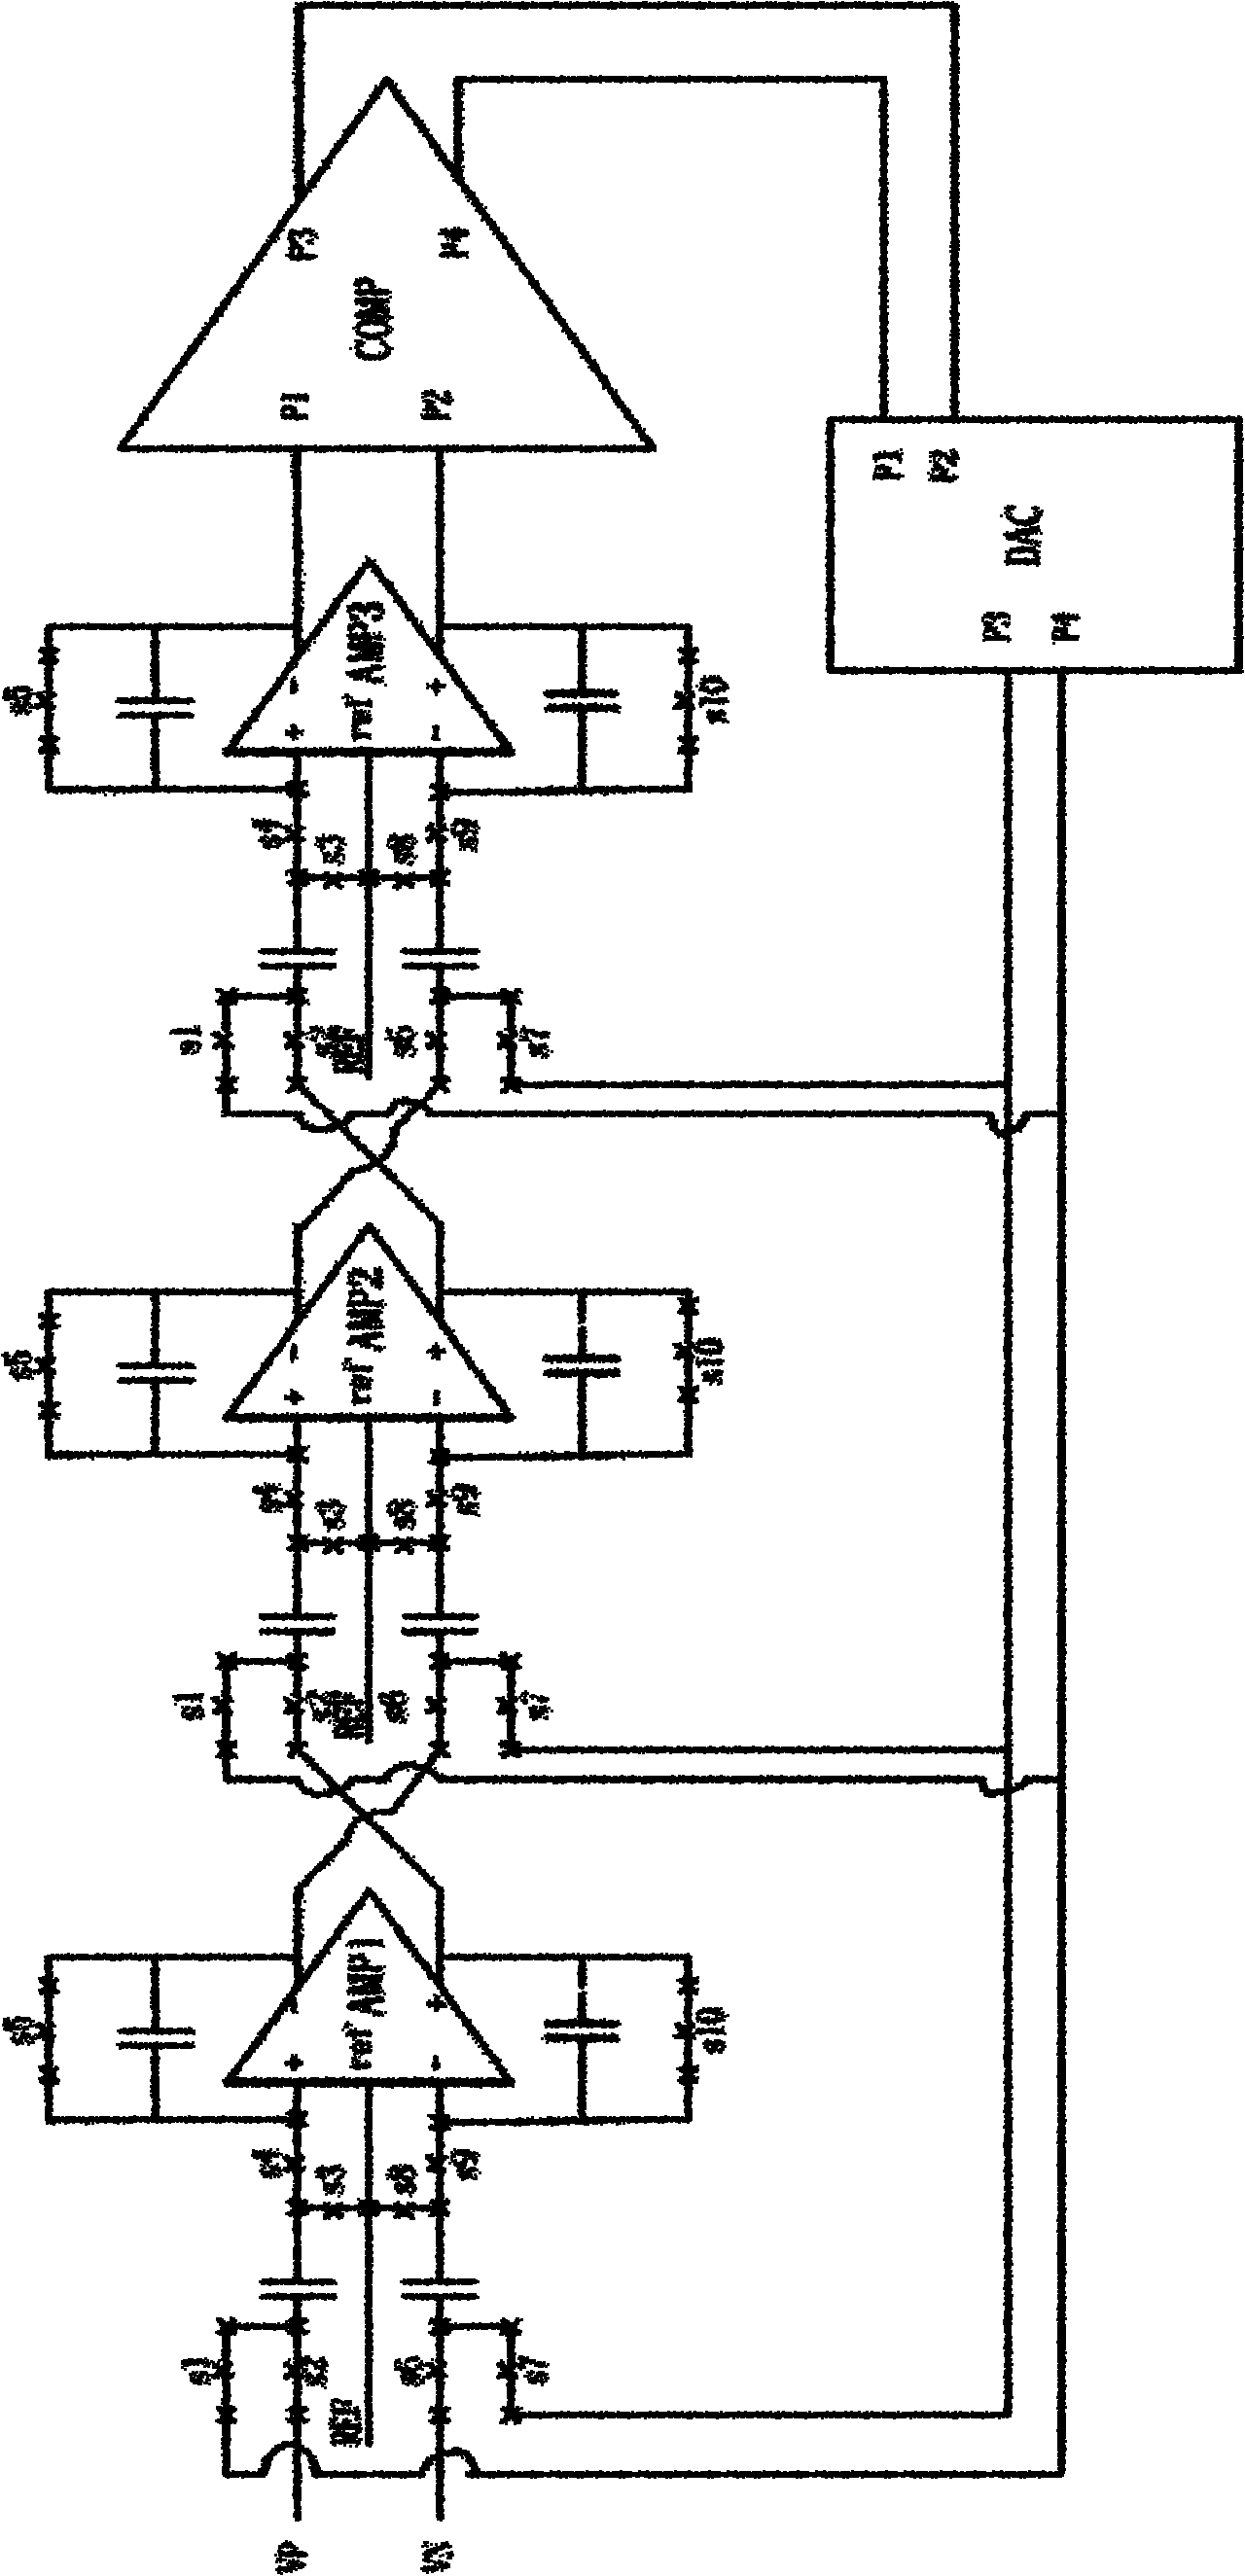 Circuit simulation method for realizing parallel computation through time domain division